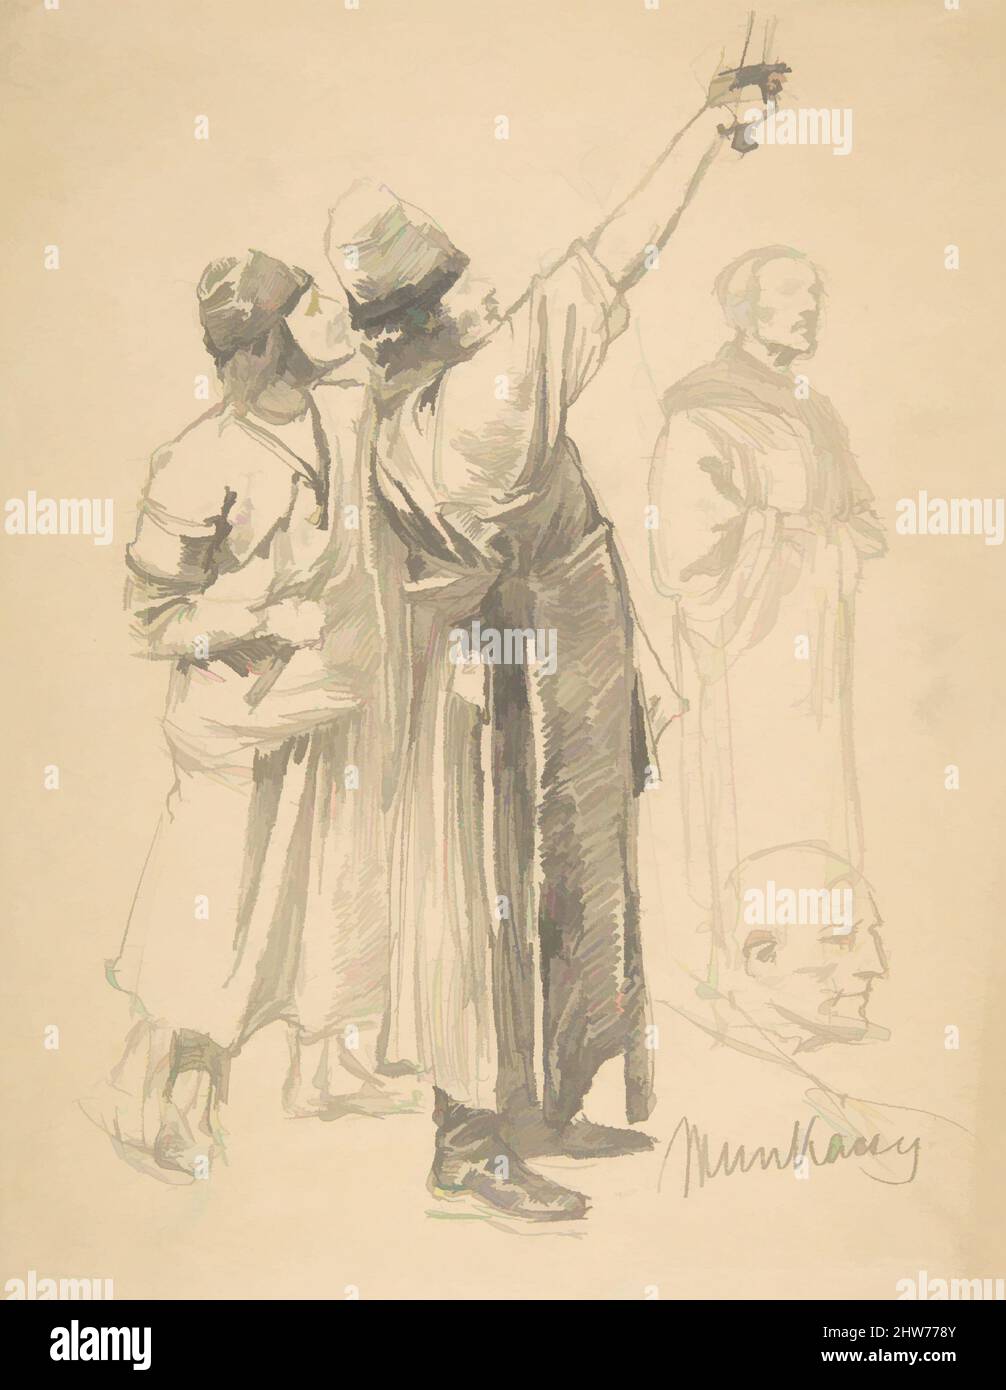 Art inspired by Studies of Standing Men, ca. 1891–92, Graphite, sheet: 10 5/8 x 8 1/4 in. (27 x 21 cm), Drawings, Mihály Munkácsy (Hungarian, Mukachevo (Munkács) 1844–1900 Endenich, Classic works modernized by Artotop with a splash of modernity. Shapes, color and value, eye-catching visual impact on art. Emotions through freedom of artworks in a contemporary way. A timeless message pursuing a wildly creative new direction. Artists turning to the digital medium and creating the Artotop NFT Stock Photo